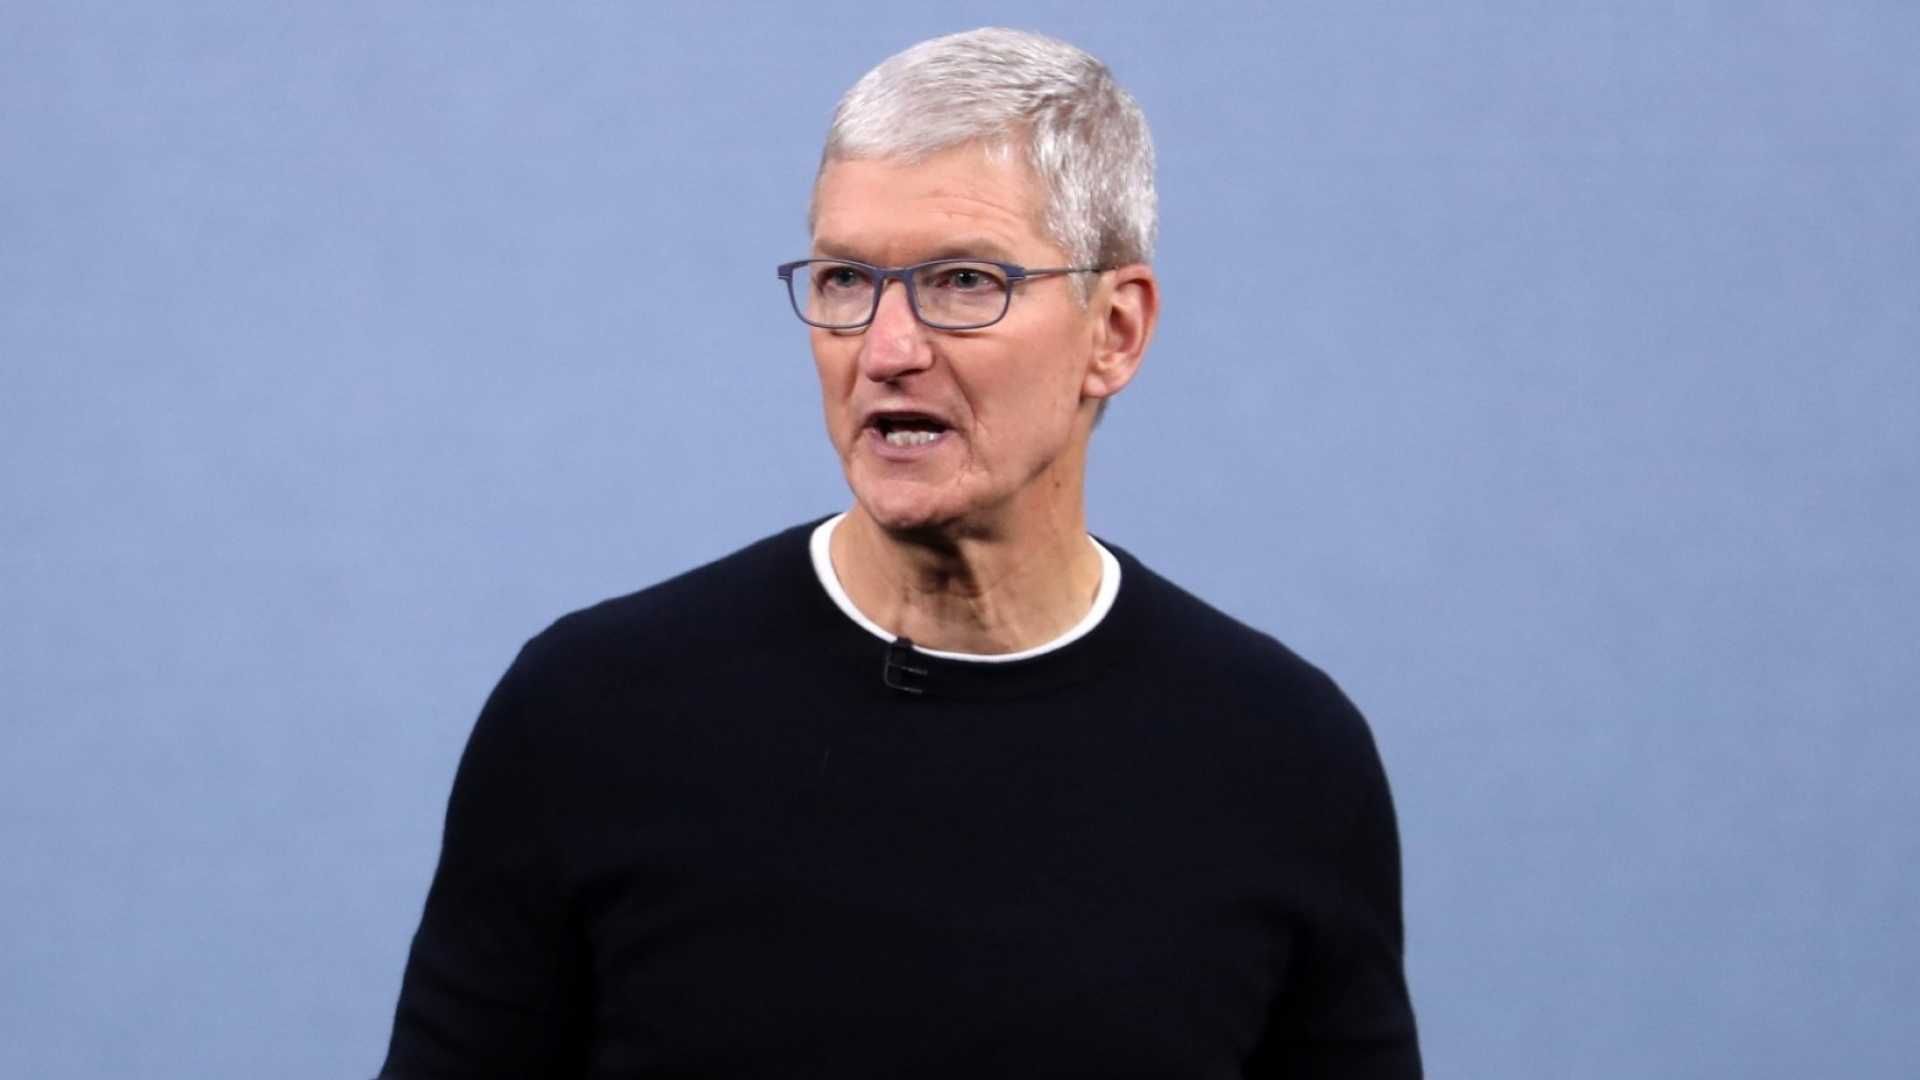 Tim Cook Powerfully Expressed the Importance of Showing Respect